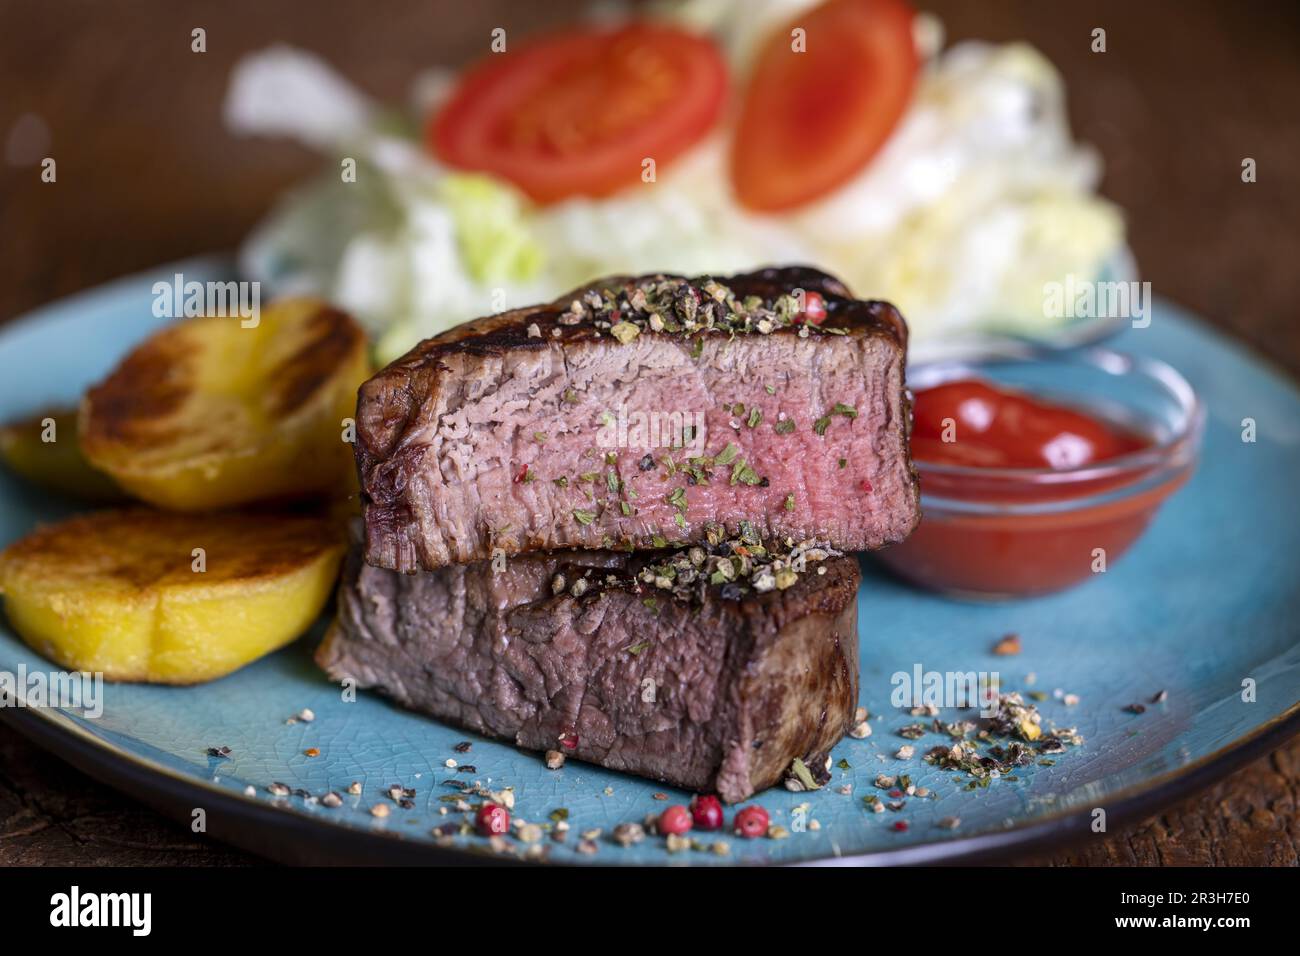 Grilled steak on a plate Stock Photo